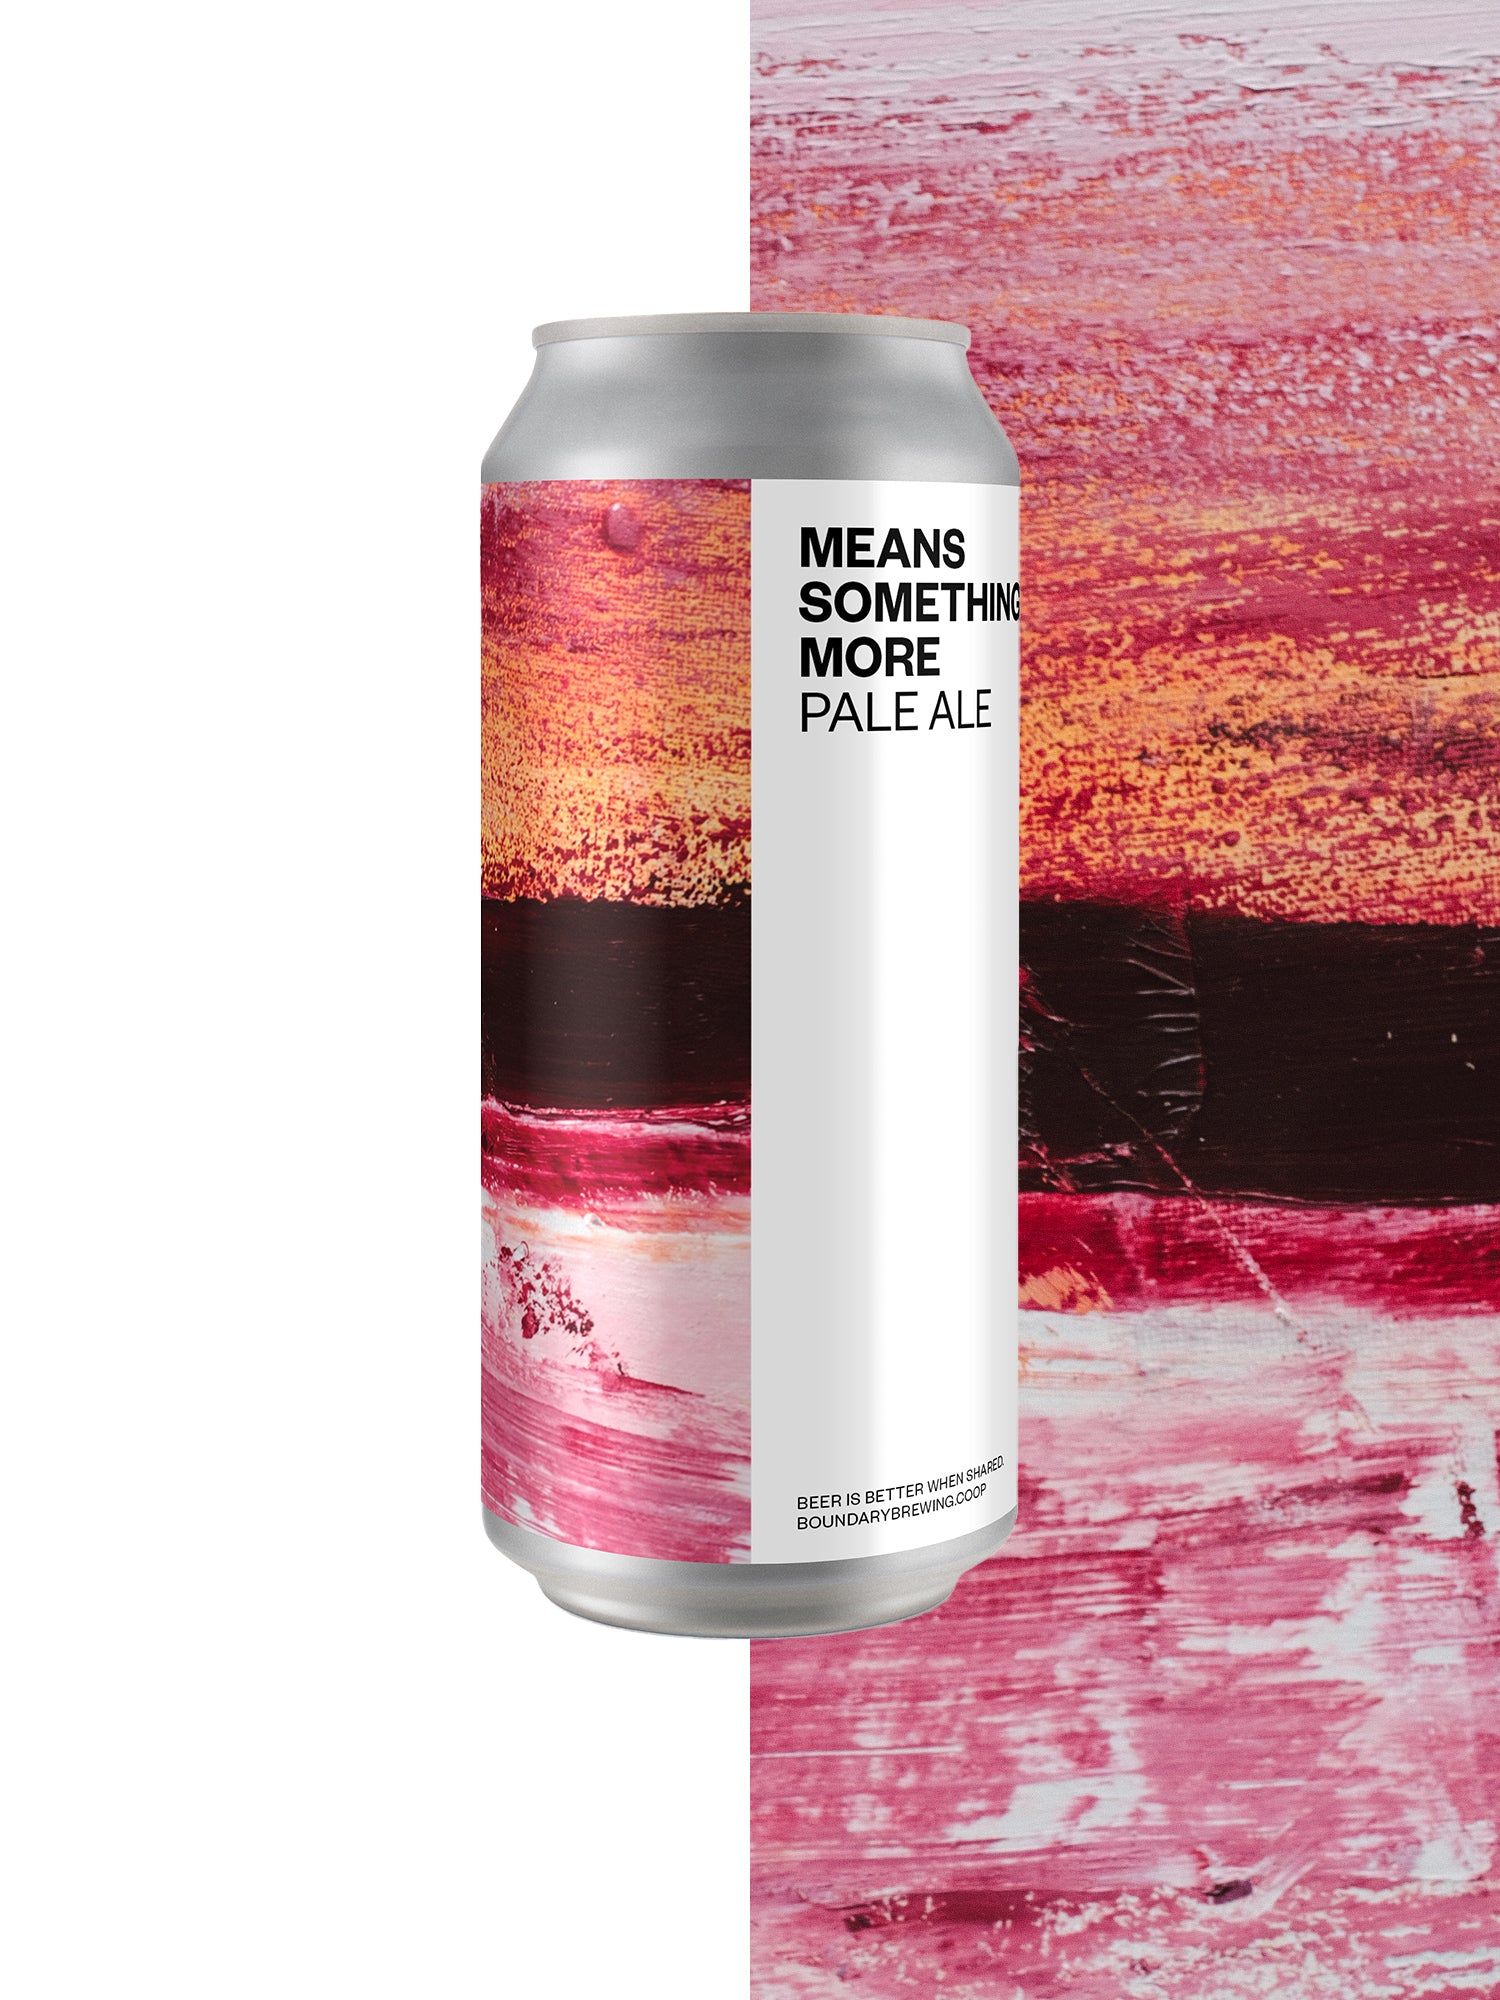 MEANS　Pale　4.2%　(4-pack)　Ale　SOMETHING　MORE　Brewing　–　Boundary